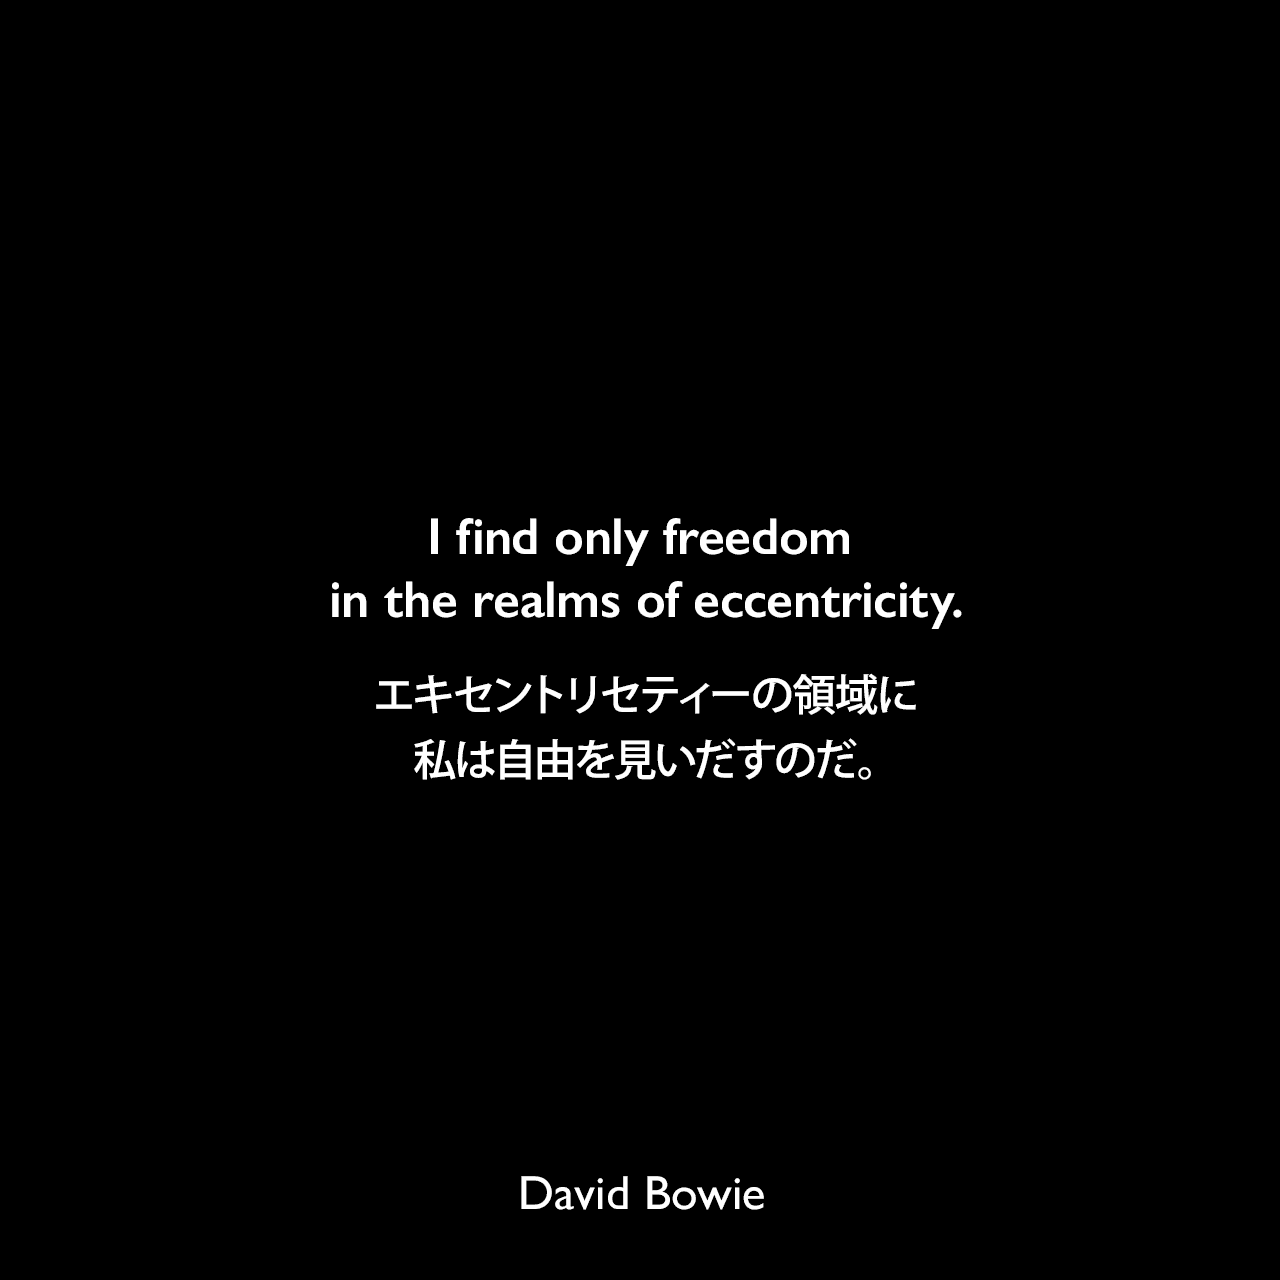 I find only freedom in the realms of eccentricity.エキセントリセティーの領域に、私は自由を見いだすのだ。David Bowie